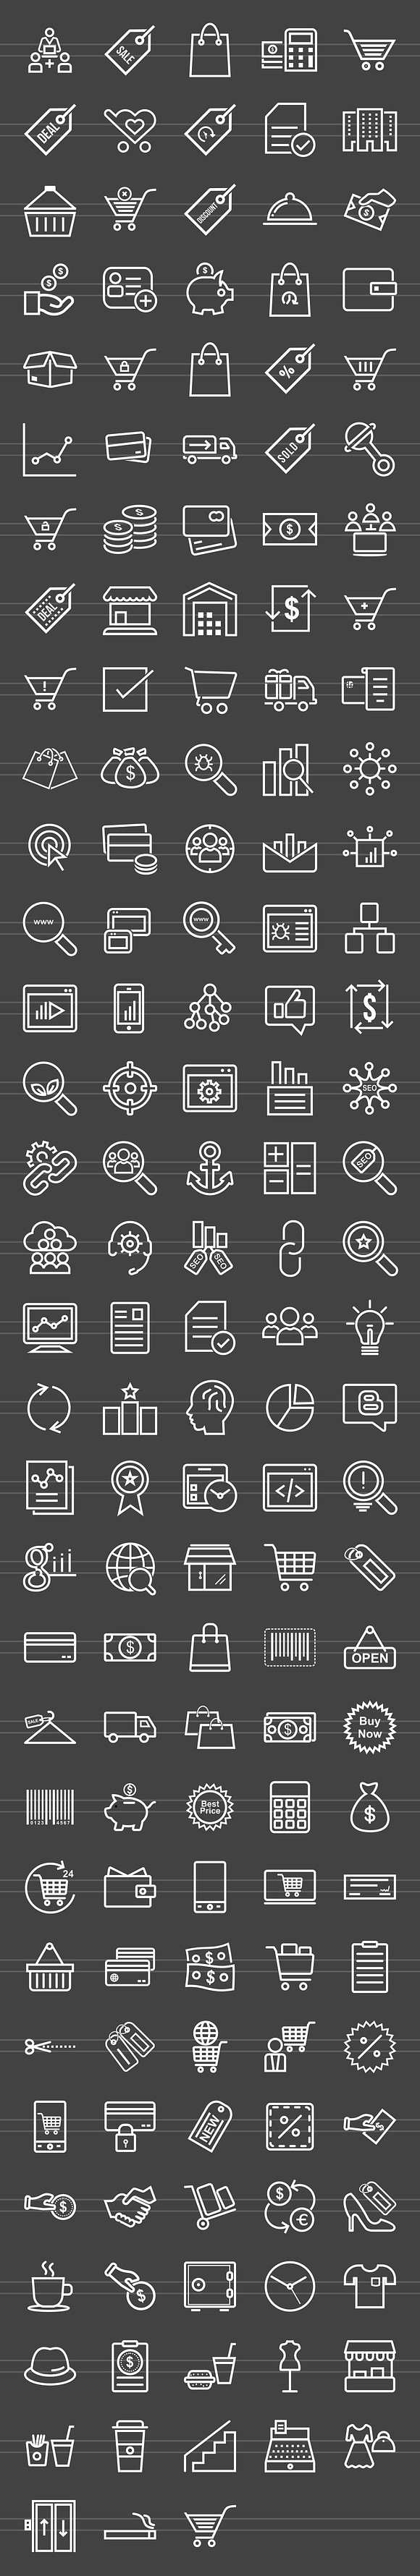 158 Shopping & E-Commerce Line Icons in Graphics - product preview 1